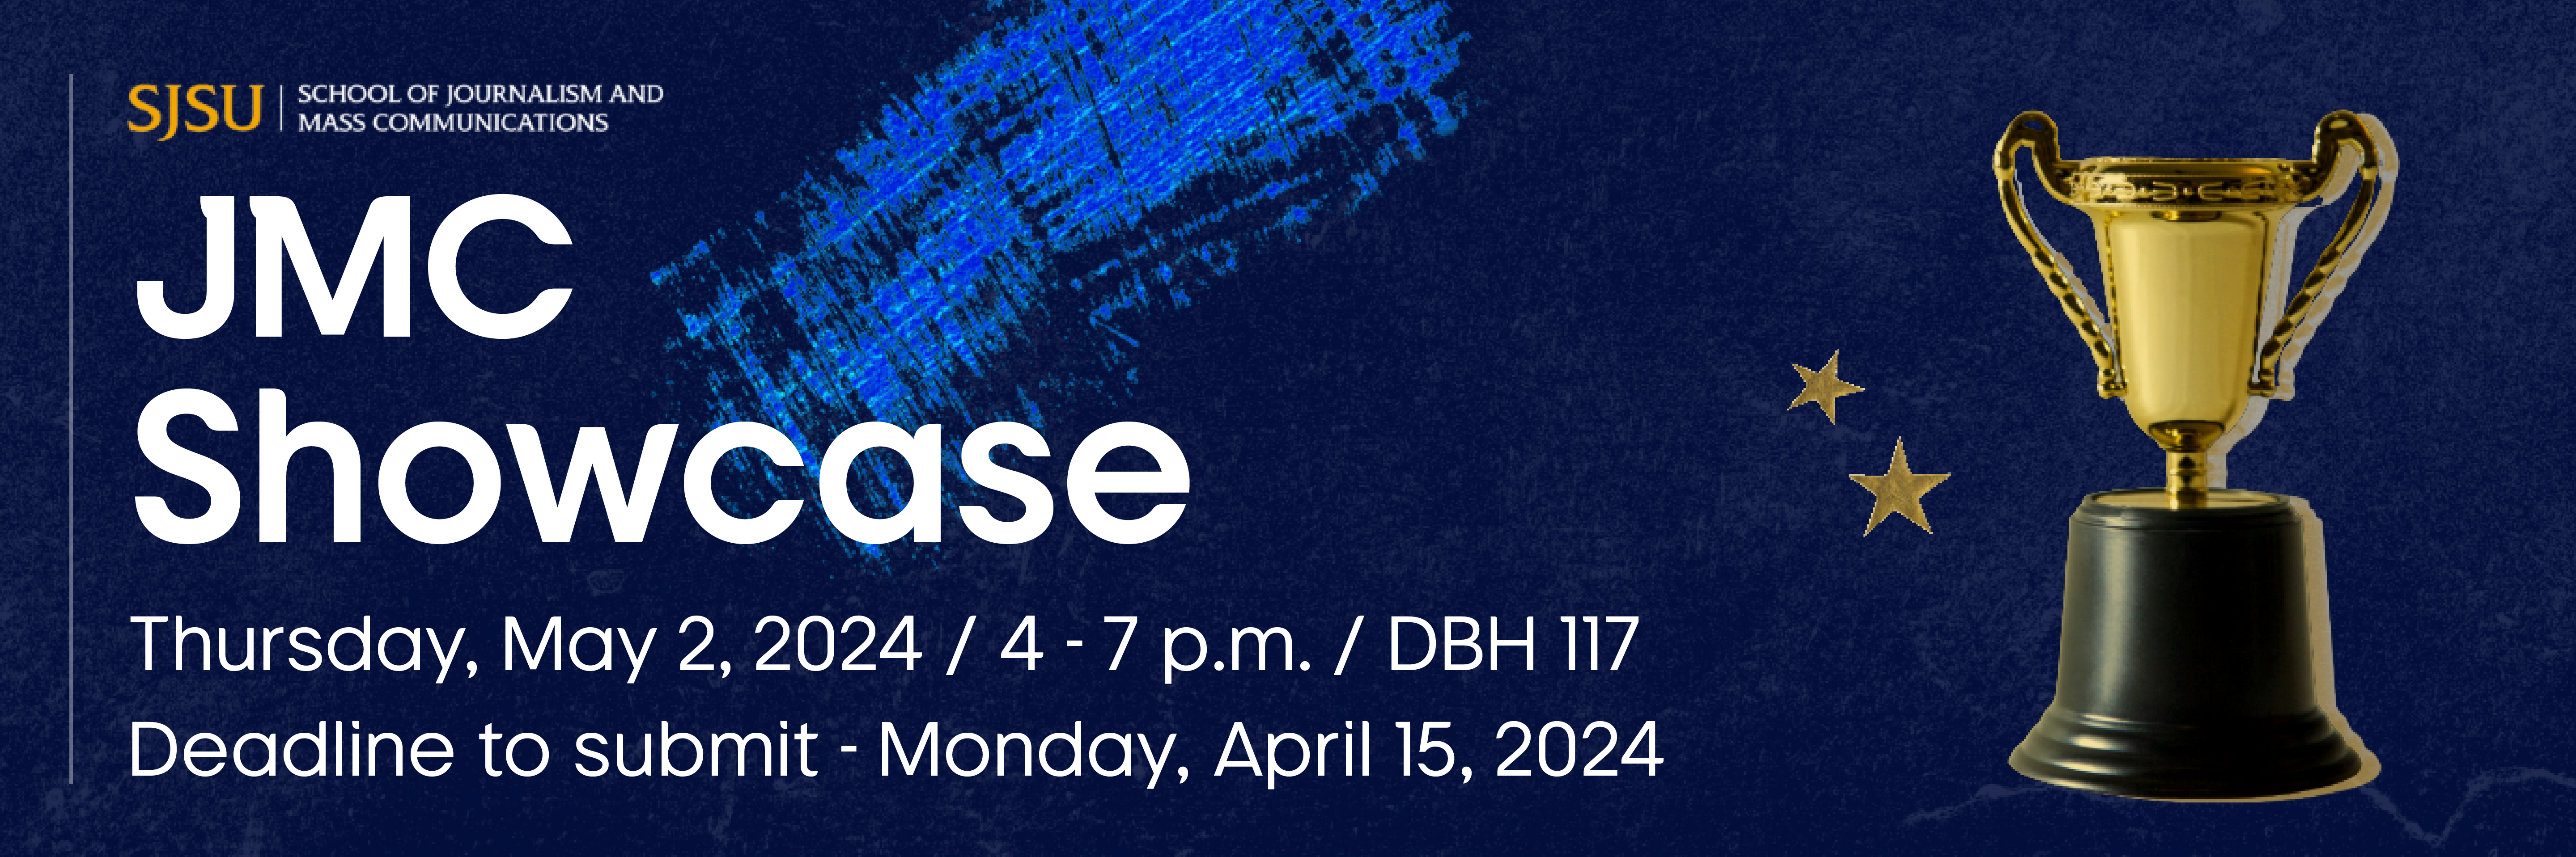 JMC Showcase Thursday, May 12, 2024 4 - 7 p.m. in DBH 117 Deadline to submit is Monday, April 15, 2024